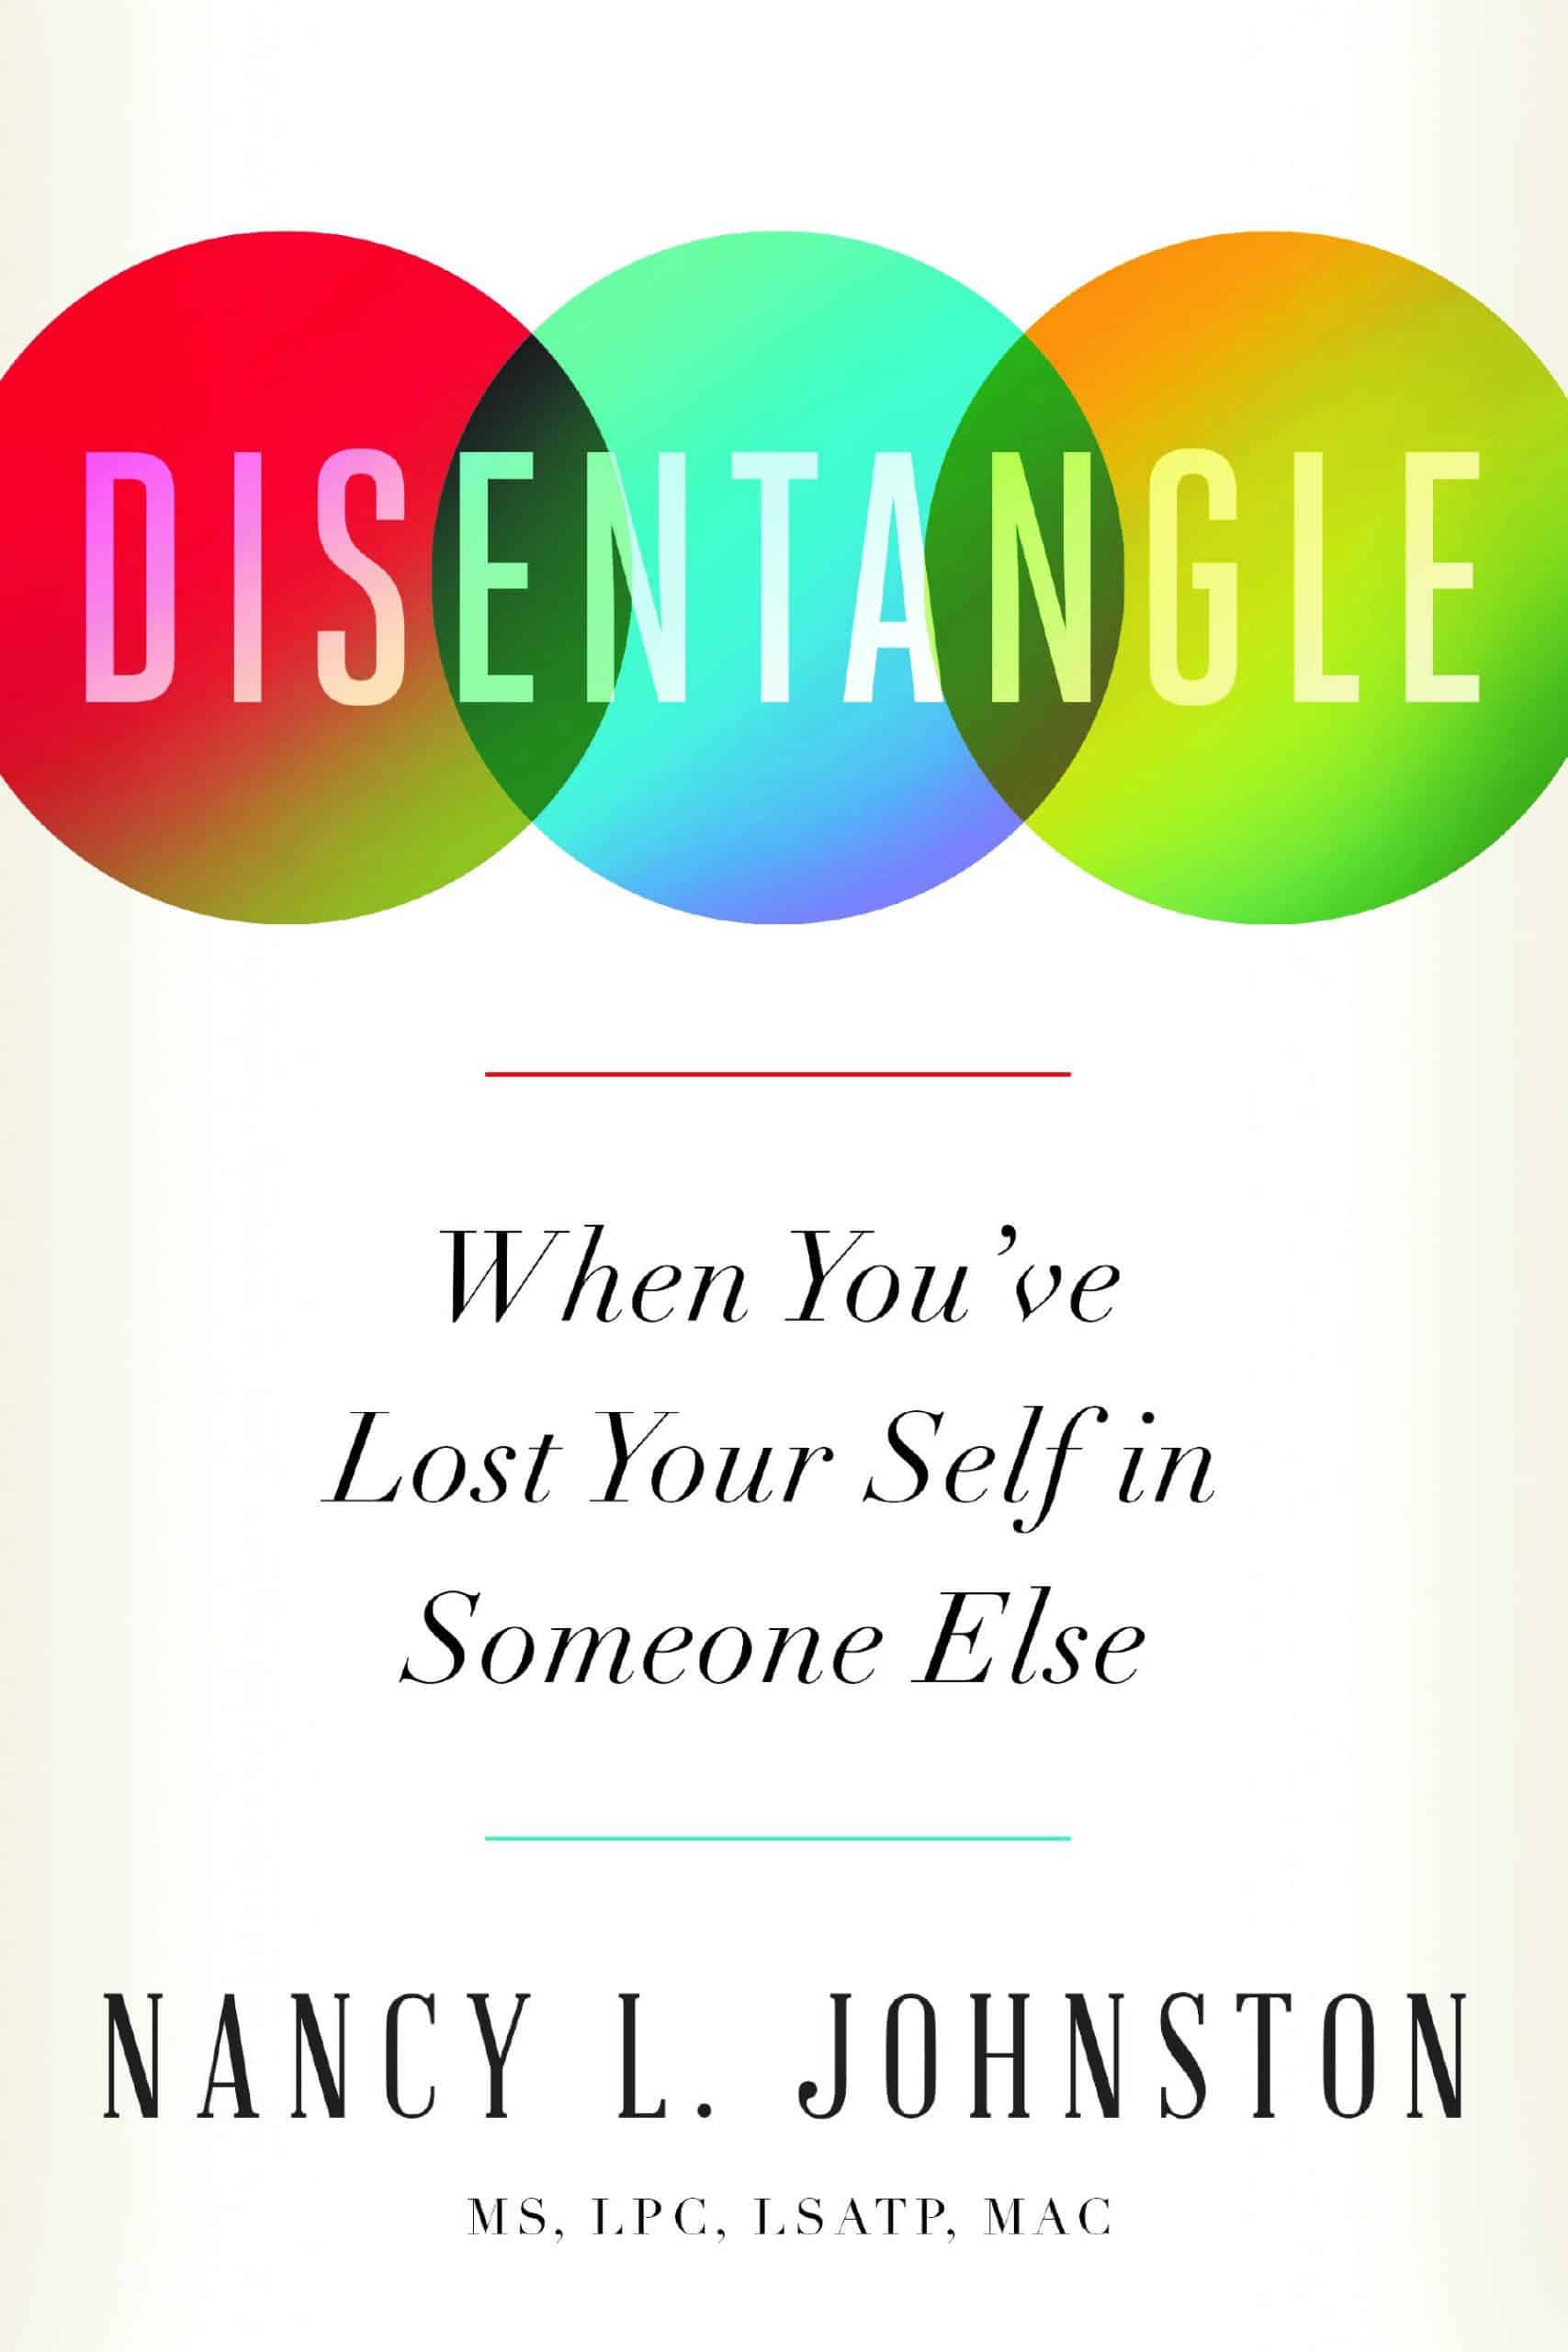 Disentangle: When You’ve Lost Your Self in Someone Else